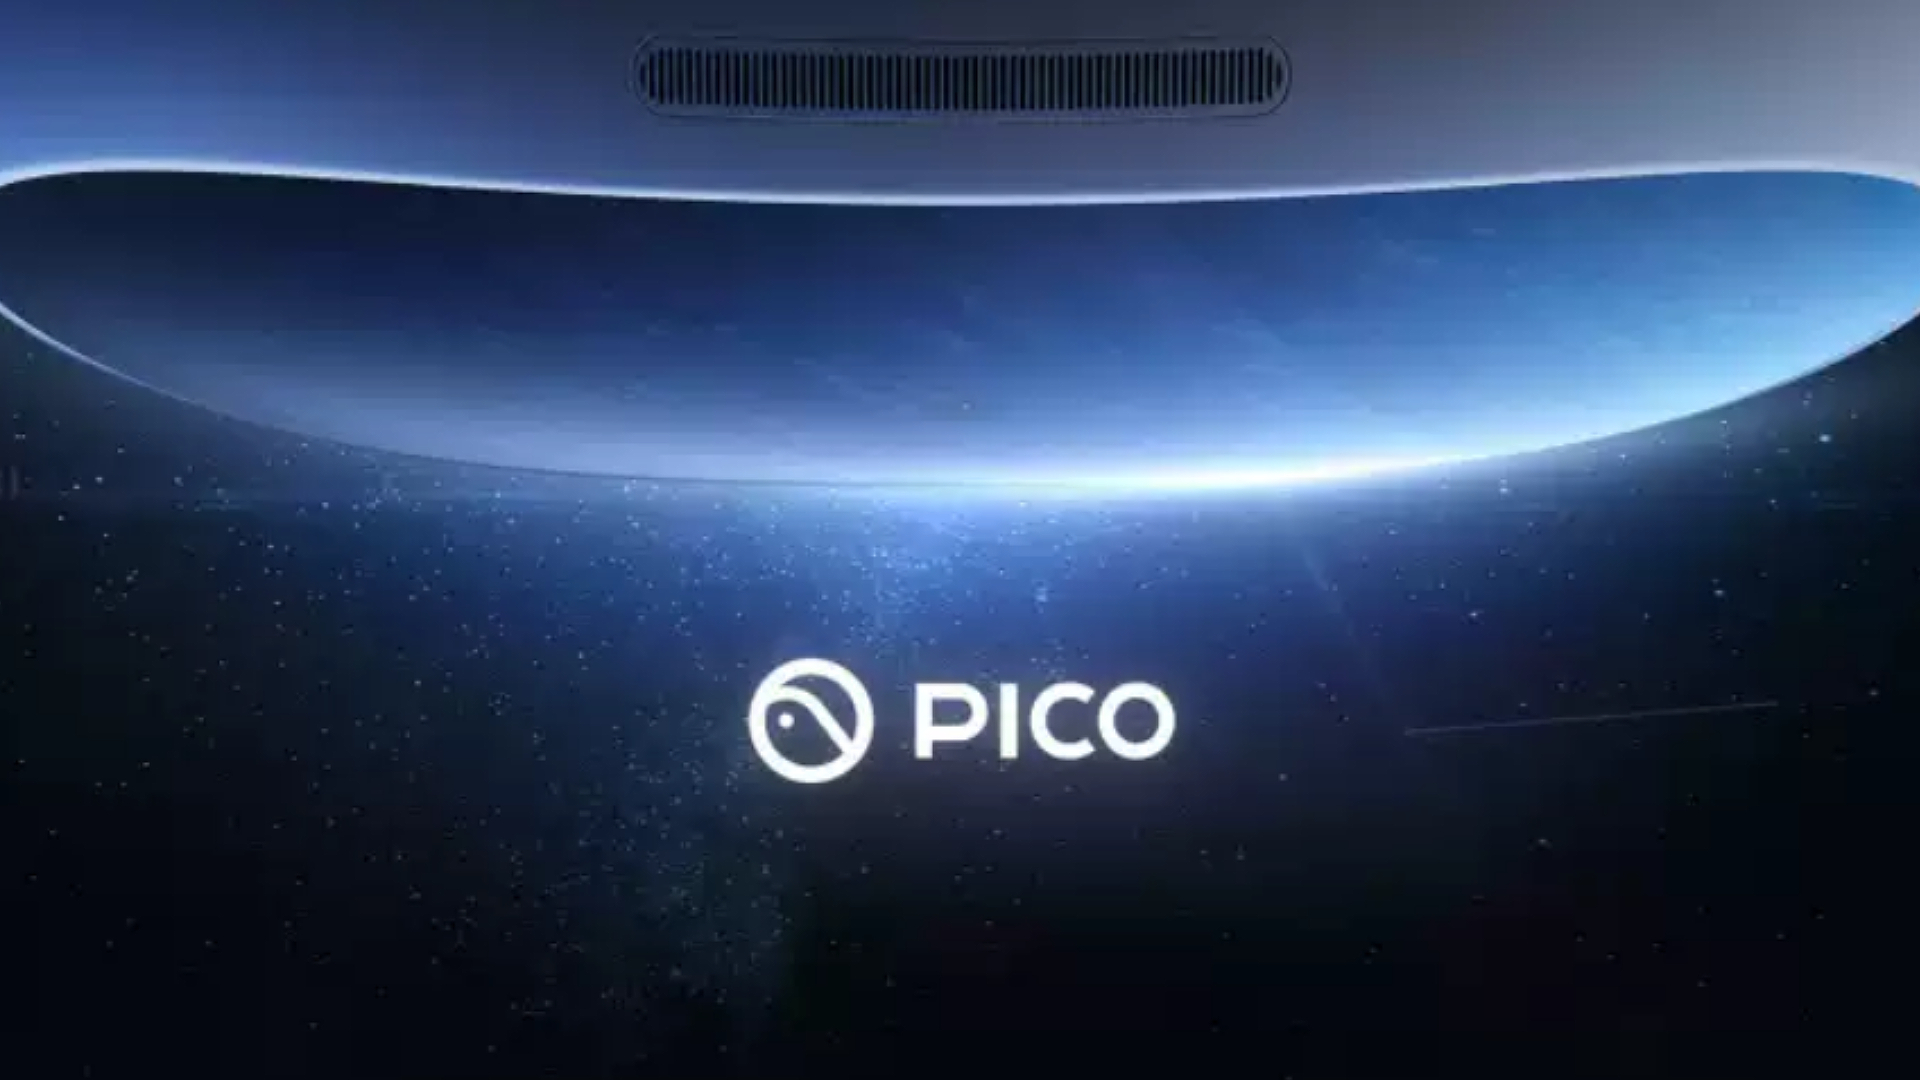 Oculus Quest 2: Promotional Pico 4 VR headset banner with text and blue tinted headset